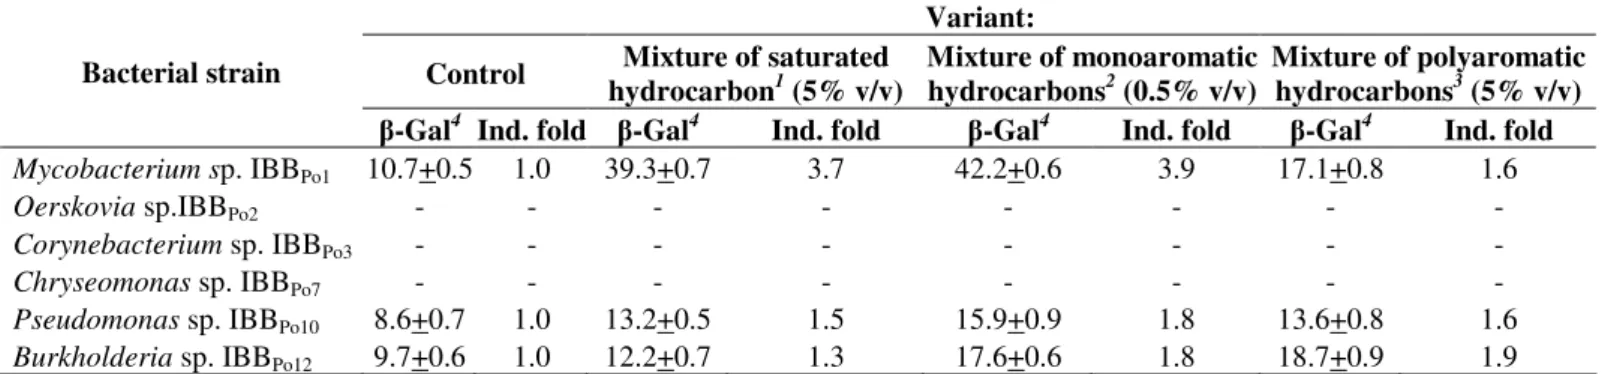 Table  4.  -galactosidase  activity  of  Gram-positive  and  Gram-negative  bacteria in  the  presence  of  mixture  of  saturated,  monoaromatic and polyaromatic hydrocarbons 